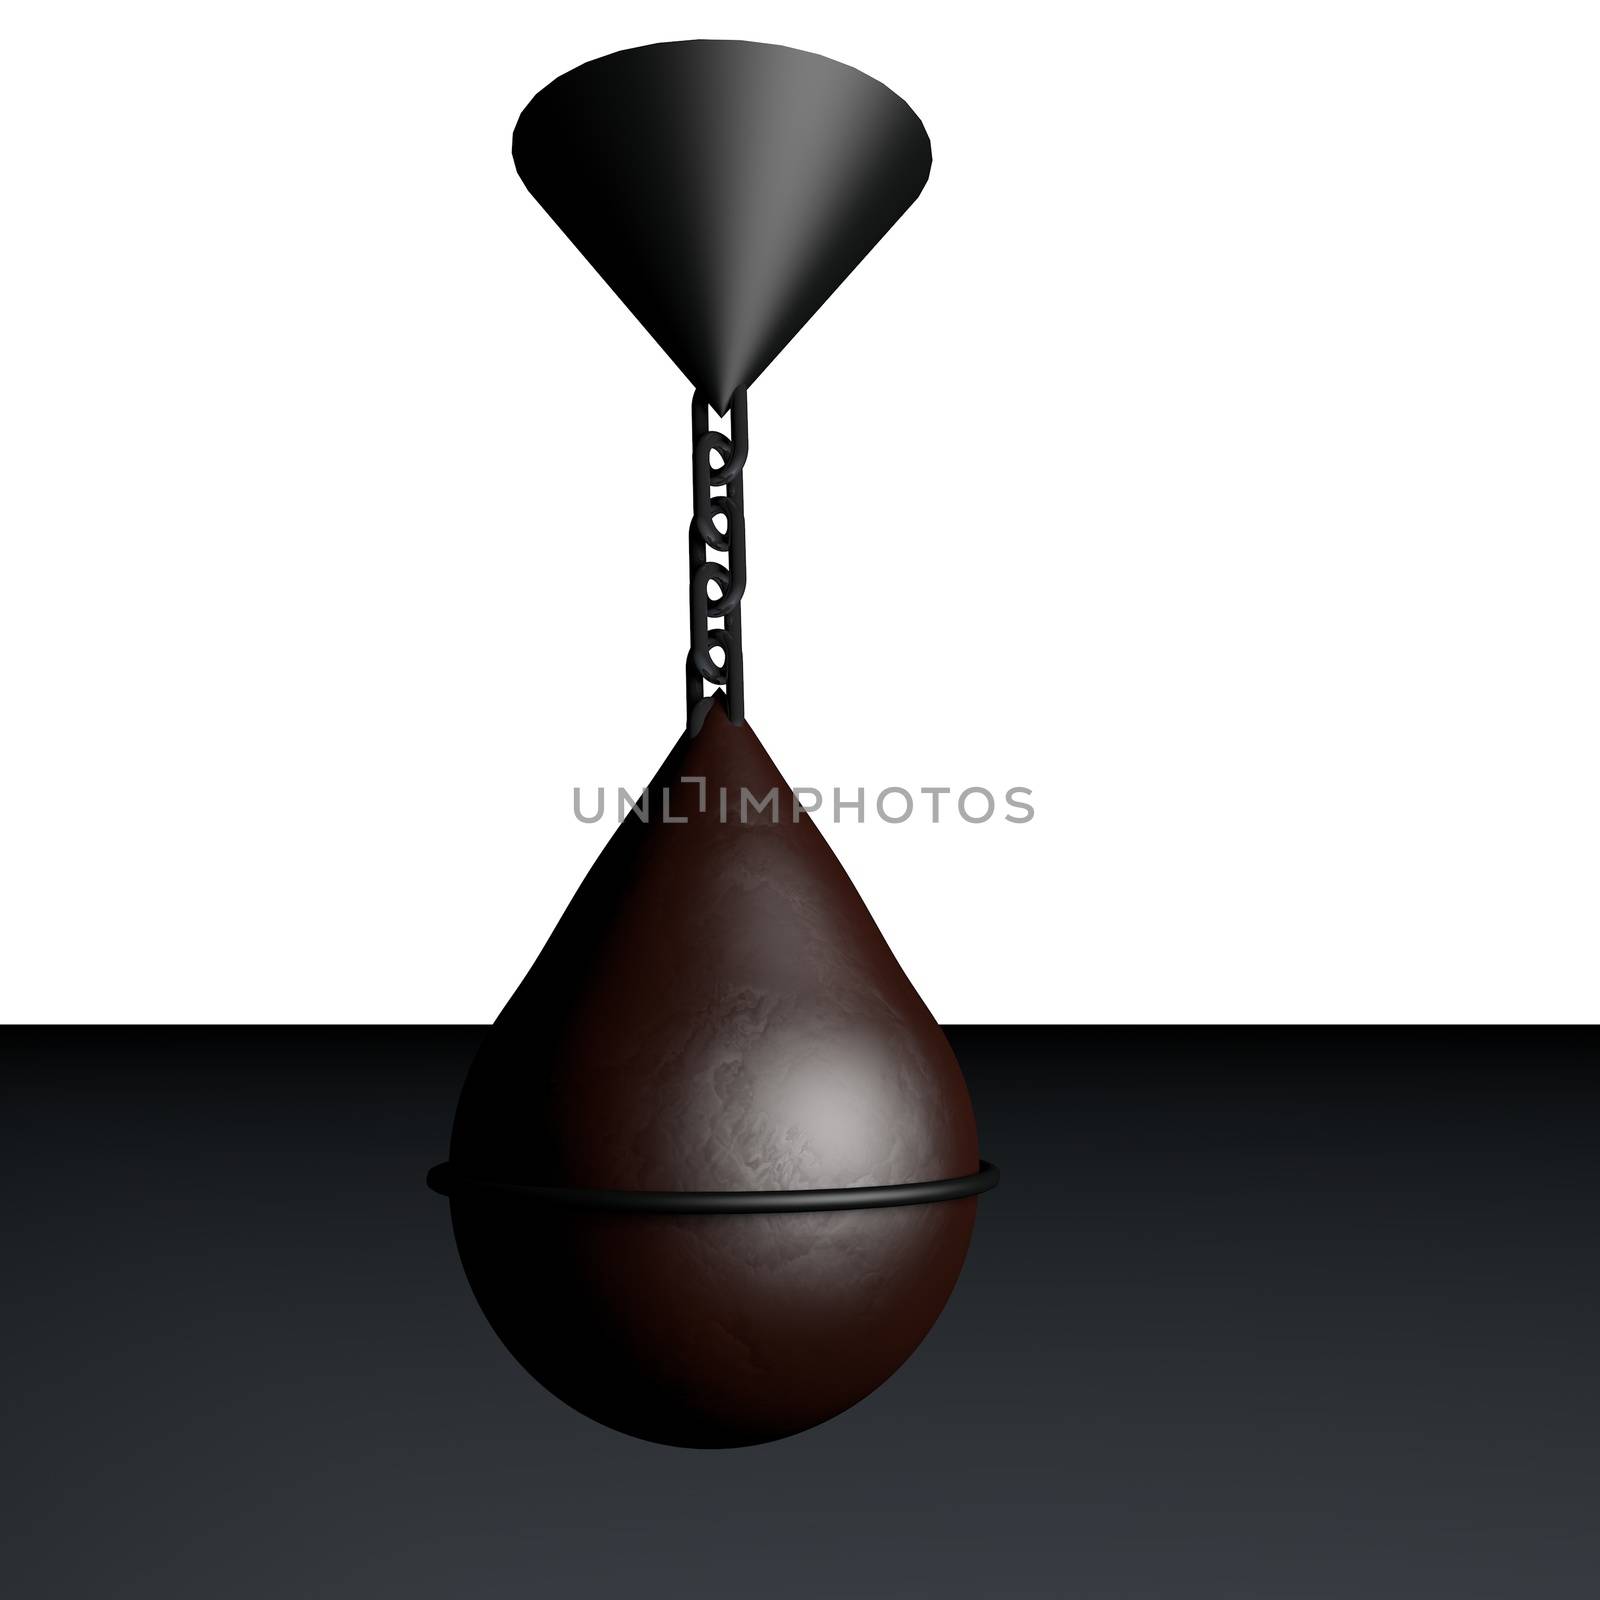 Punching ball pending from ceiling, 3d render